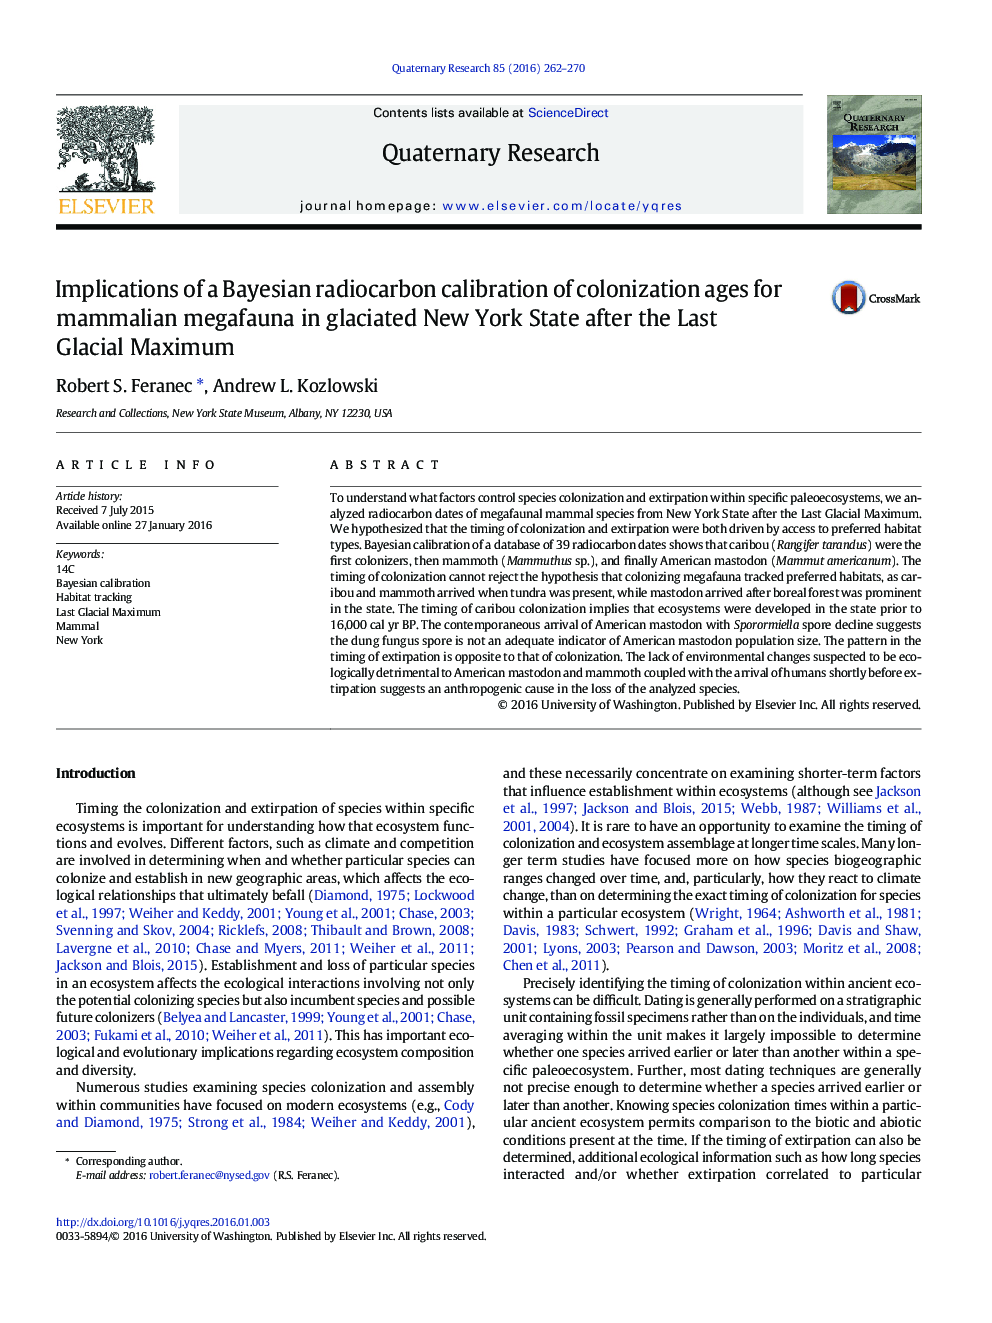 Implications of a Bayesian radiocarbon calibration of colonization ages for mammalian megafauna in glaciated New York State after the Last Glacial Maximum